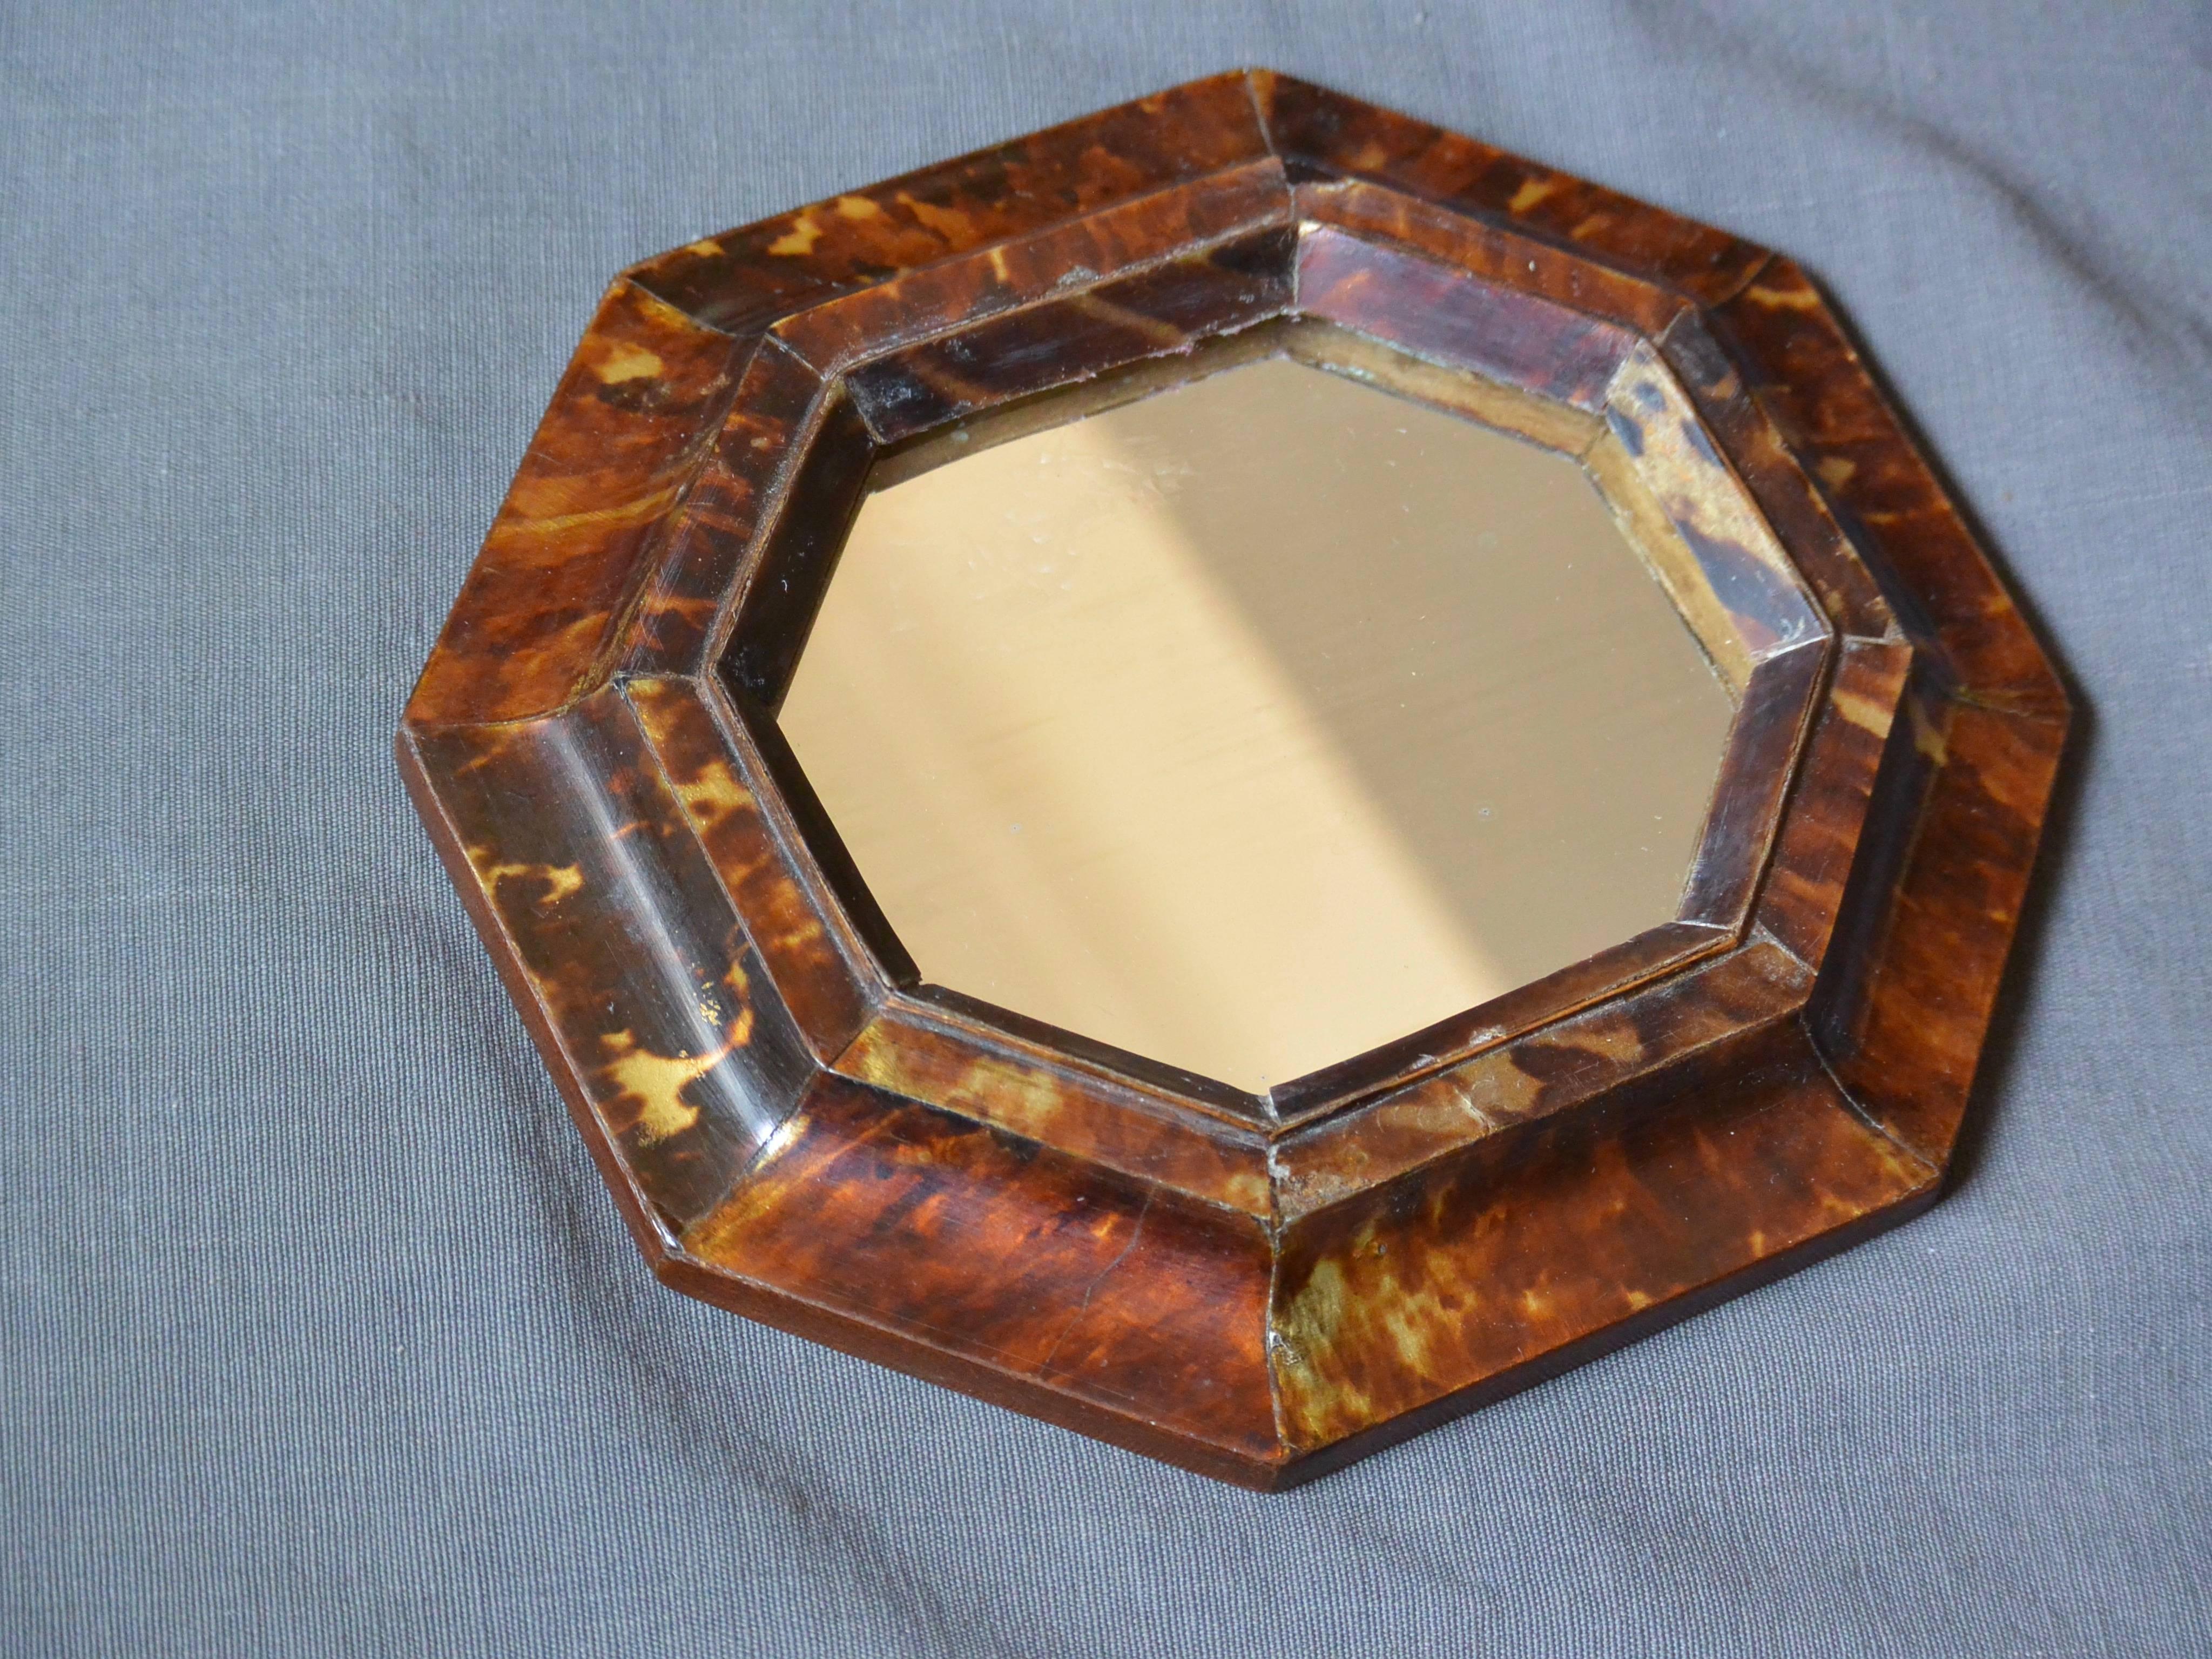 Small antique Sicilian octagonal tortoiseshell framed mirror with later antique mirror plate, Italy, circa 1860.
Dimensions: 6.88